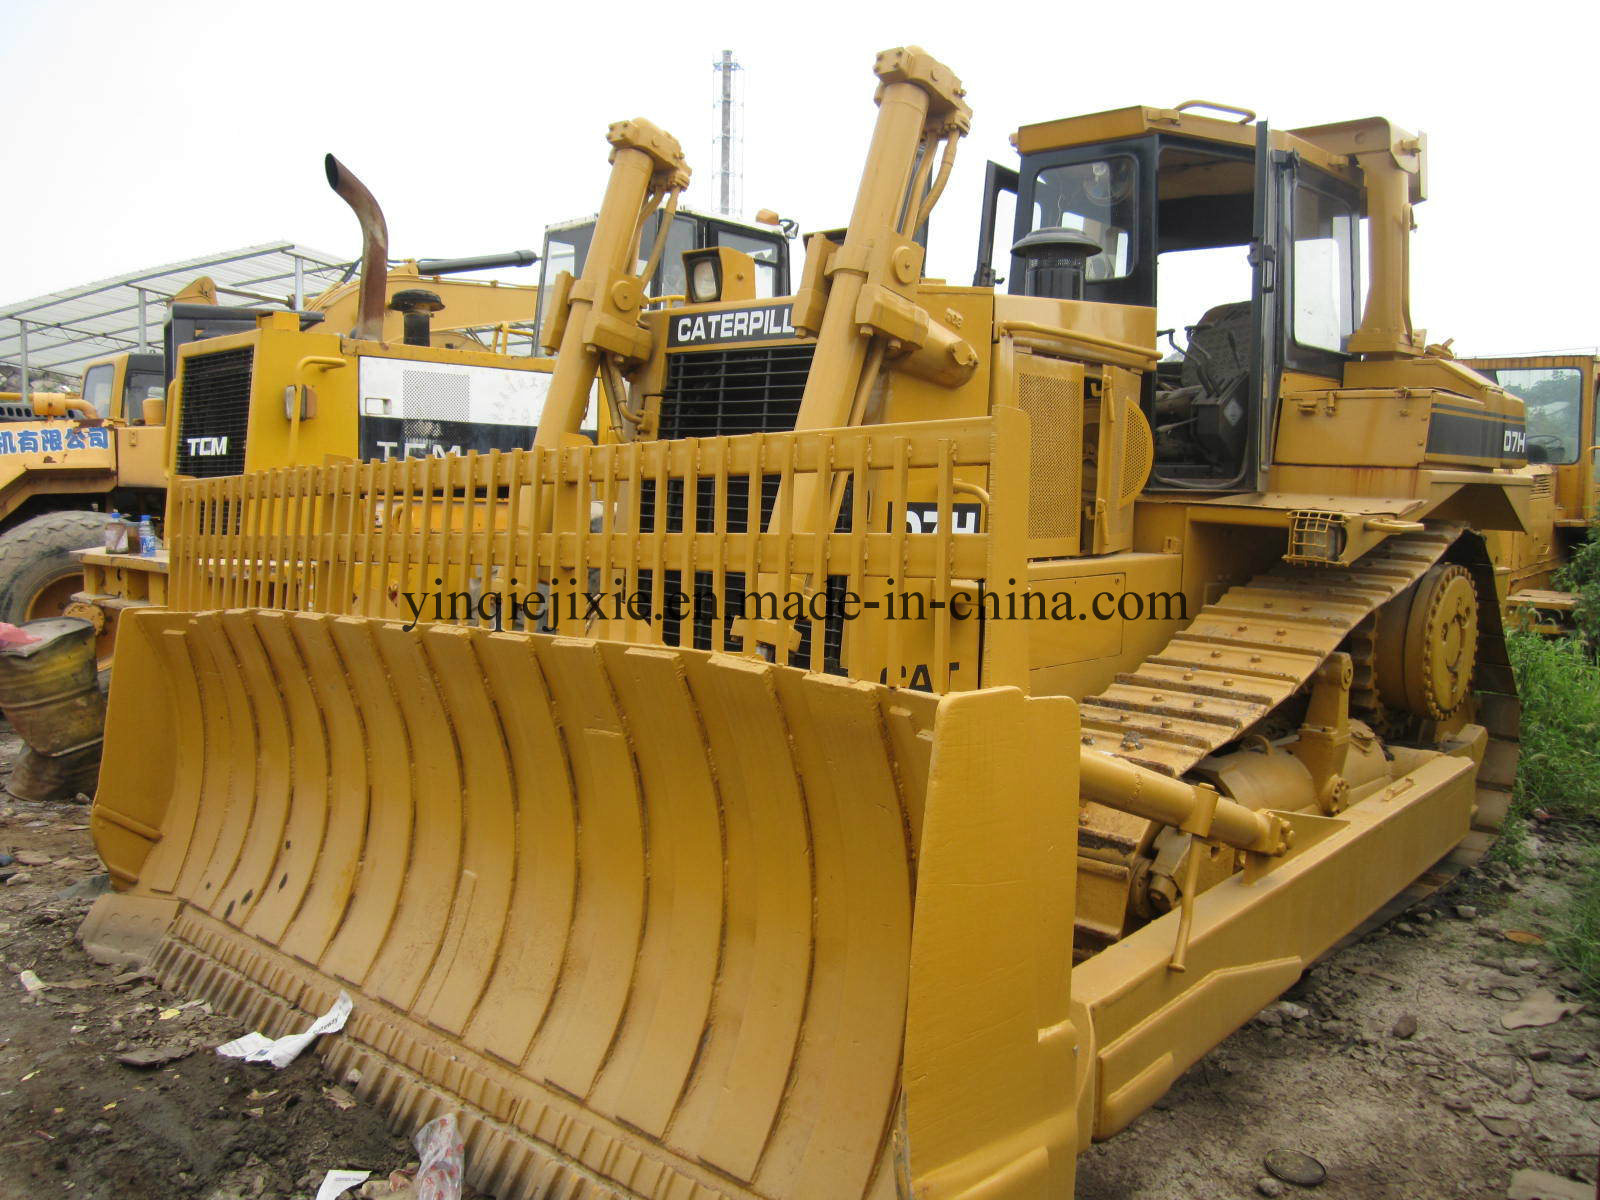 Secondhand/Used Original D7r D7g D7h Bulldozer for Sale in High Quality